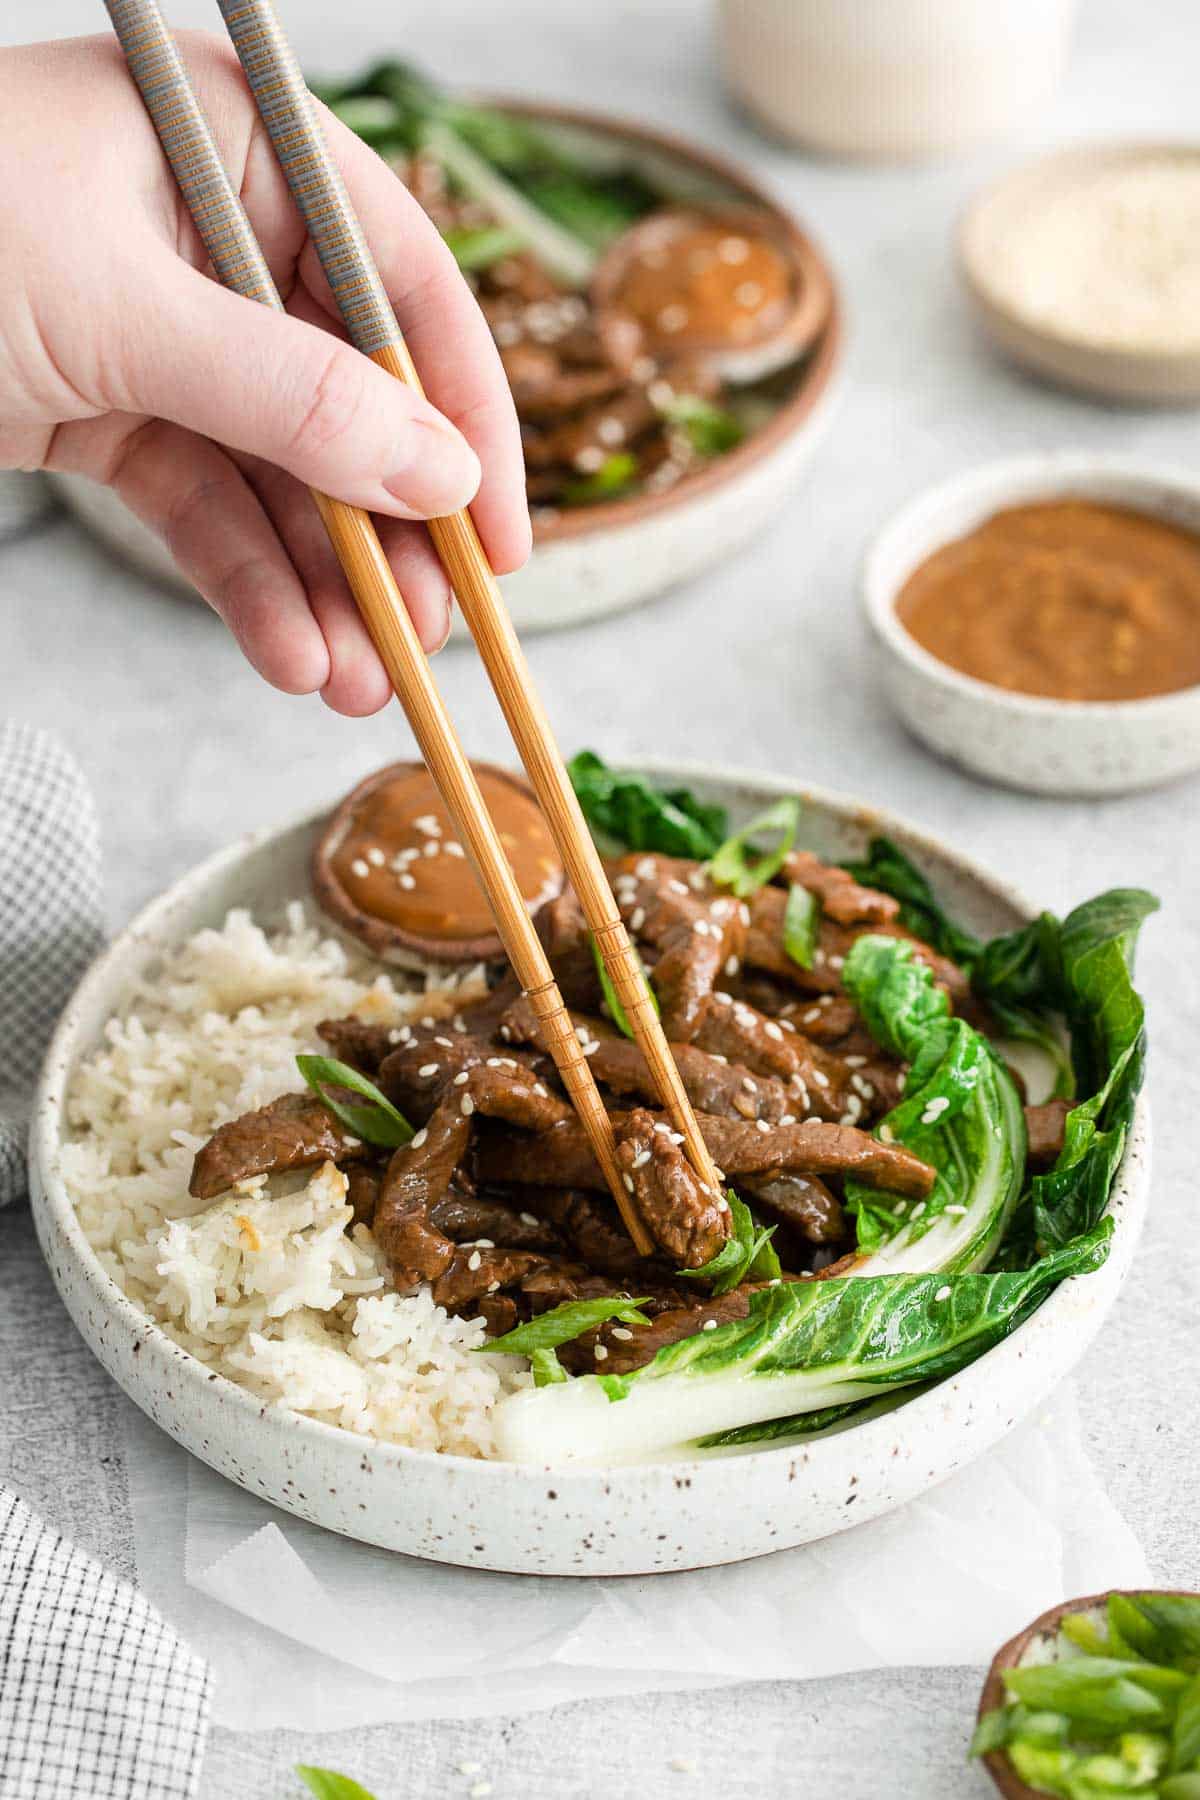 chop sticks picking up a strip of cooked steak in a bowl with white rice and bok choy.